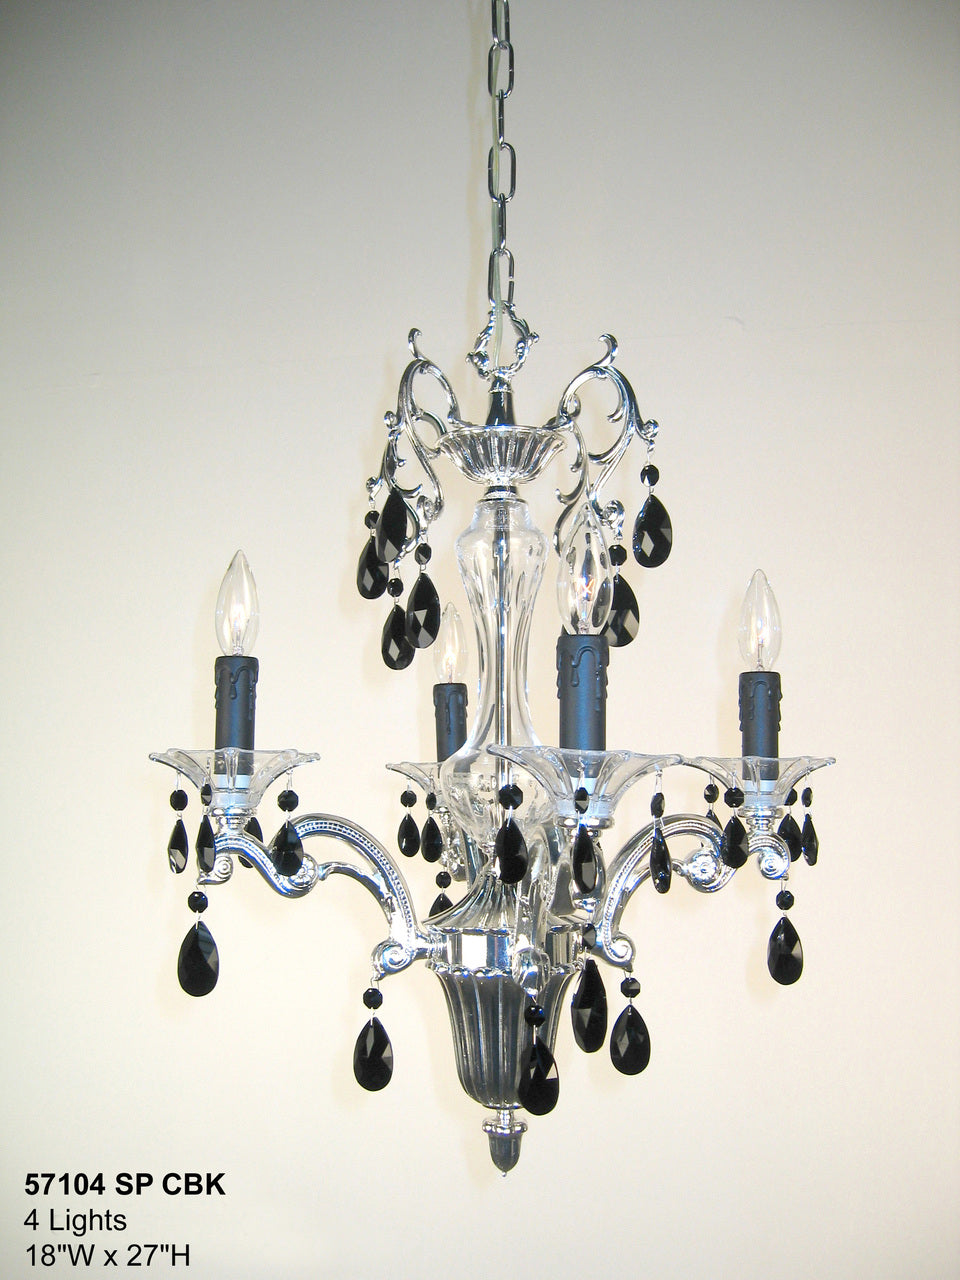 Classic Lighting 57104 SP CBK Via Firenze Crystal Mini Chandelier in Silver (Imported from Spain)